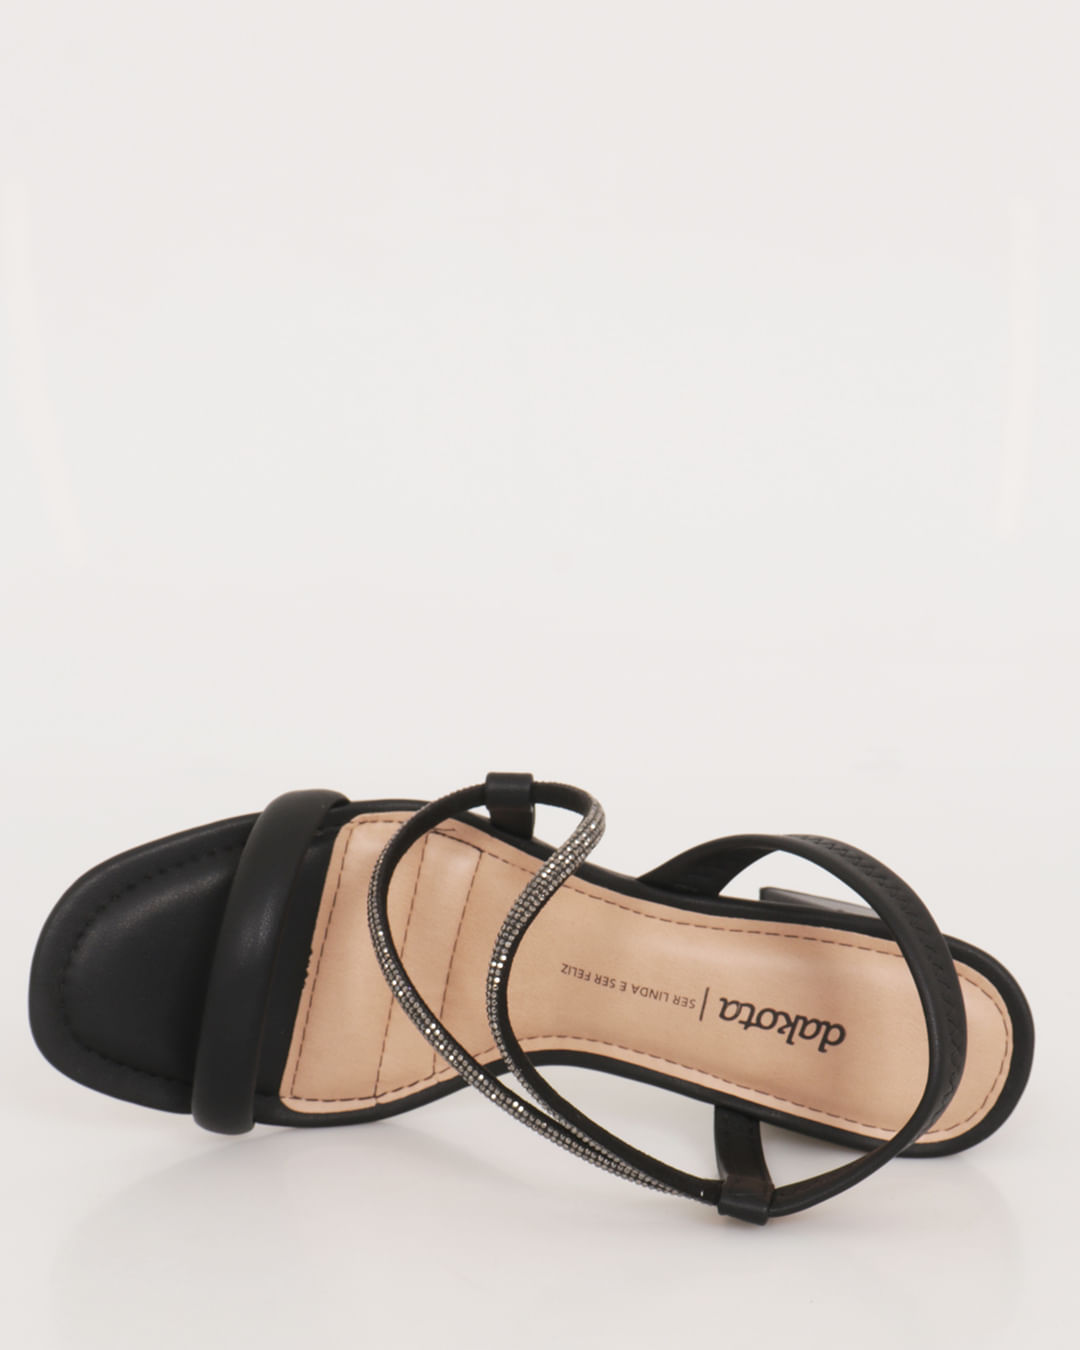 Boohoo Leather Toe Thong Sandals In Black, $17, Asos